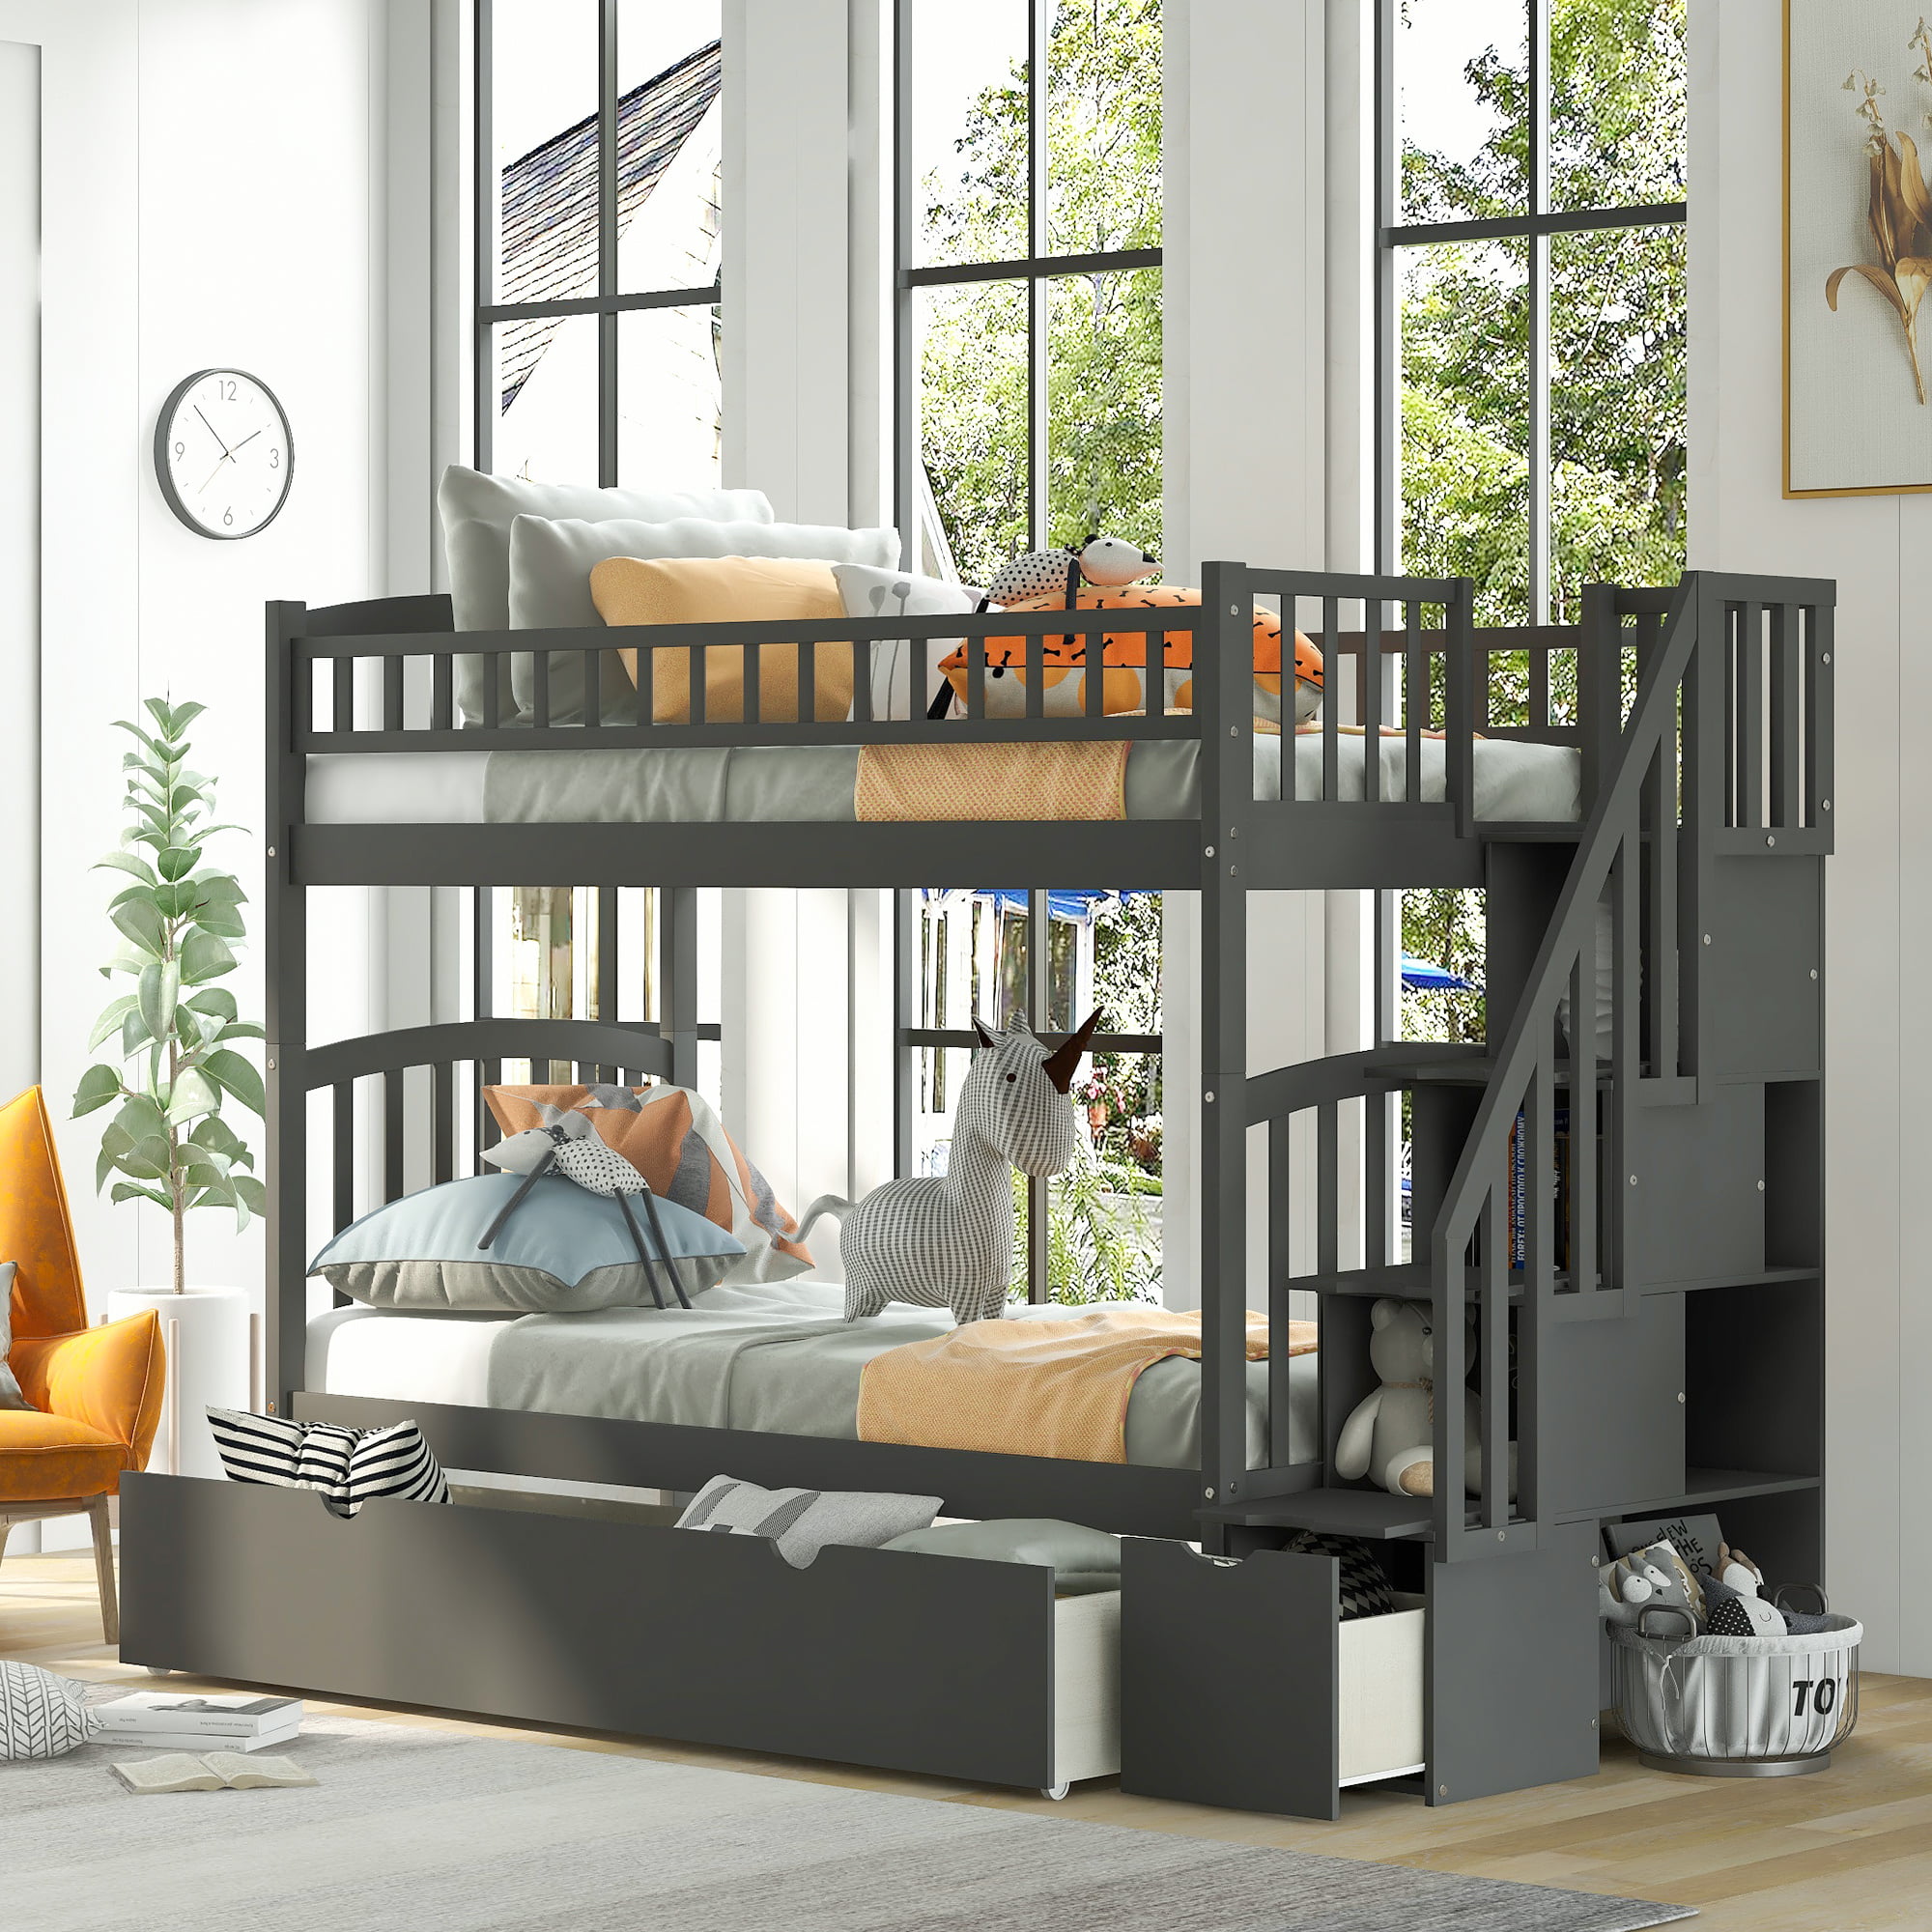 Twin Over Bunk Bed Aukfa, Toddler Bunk Beds With Steps